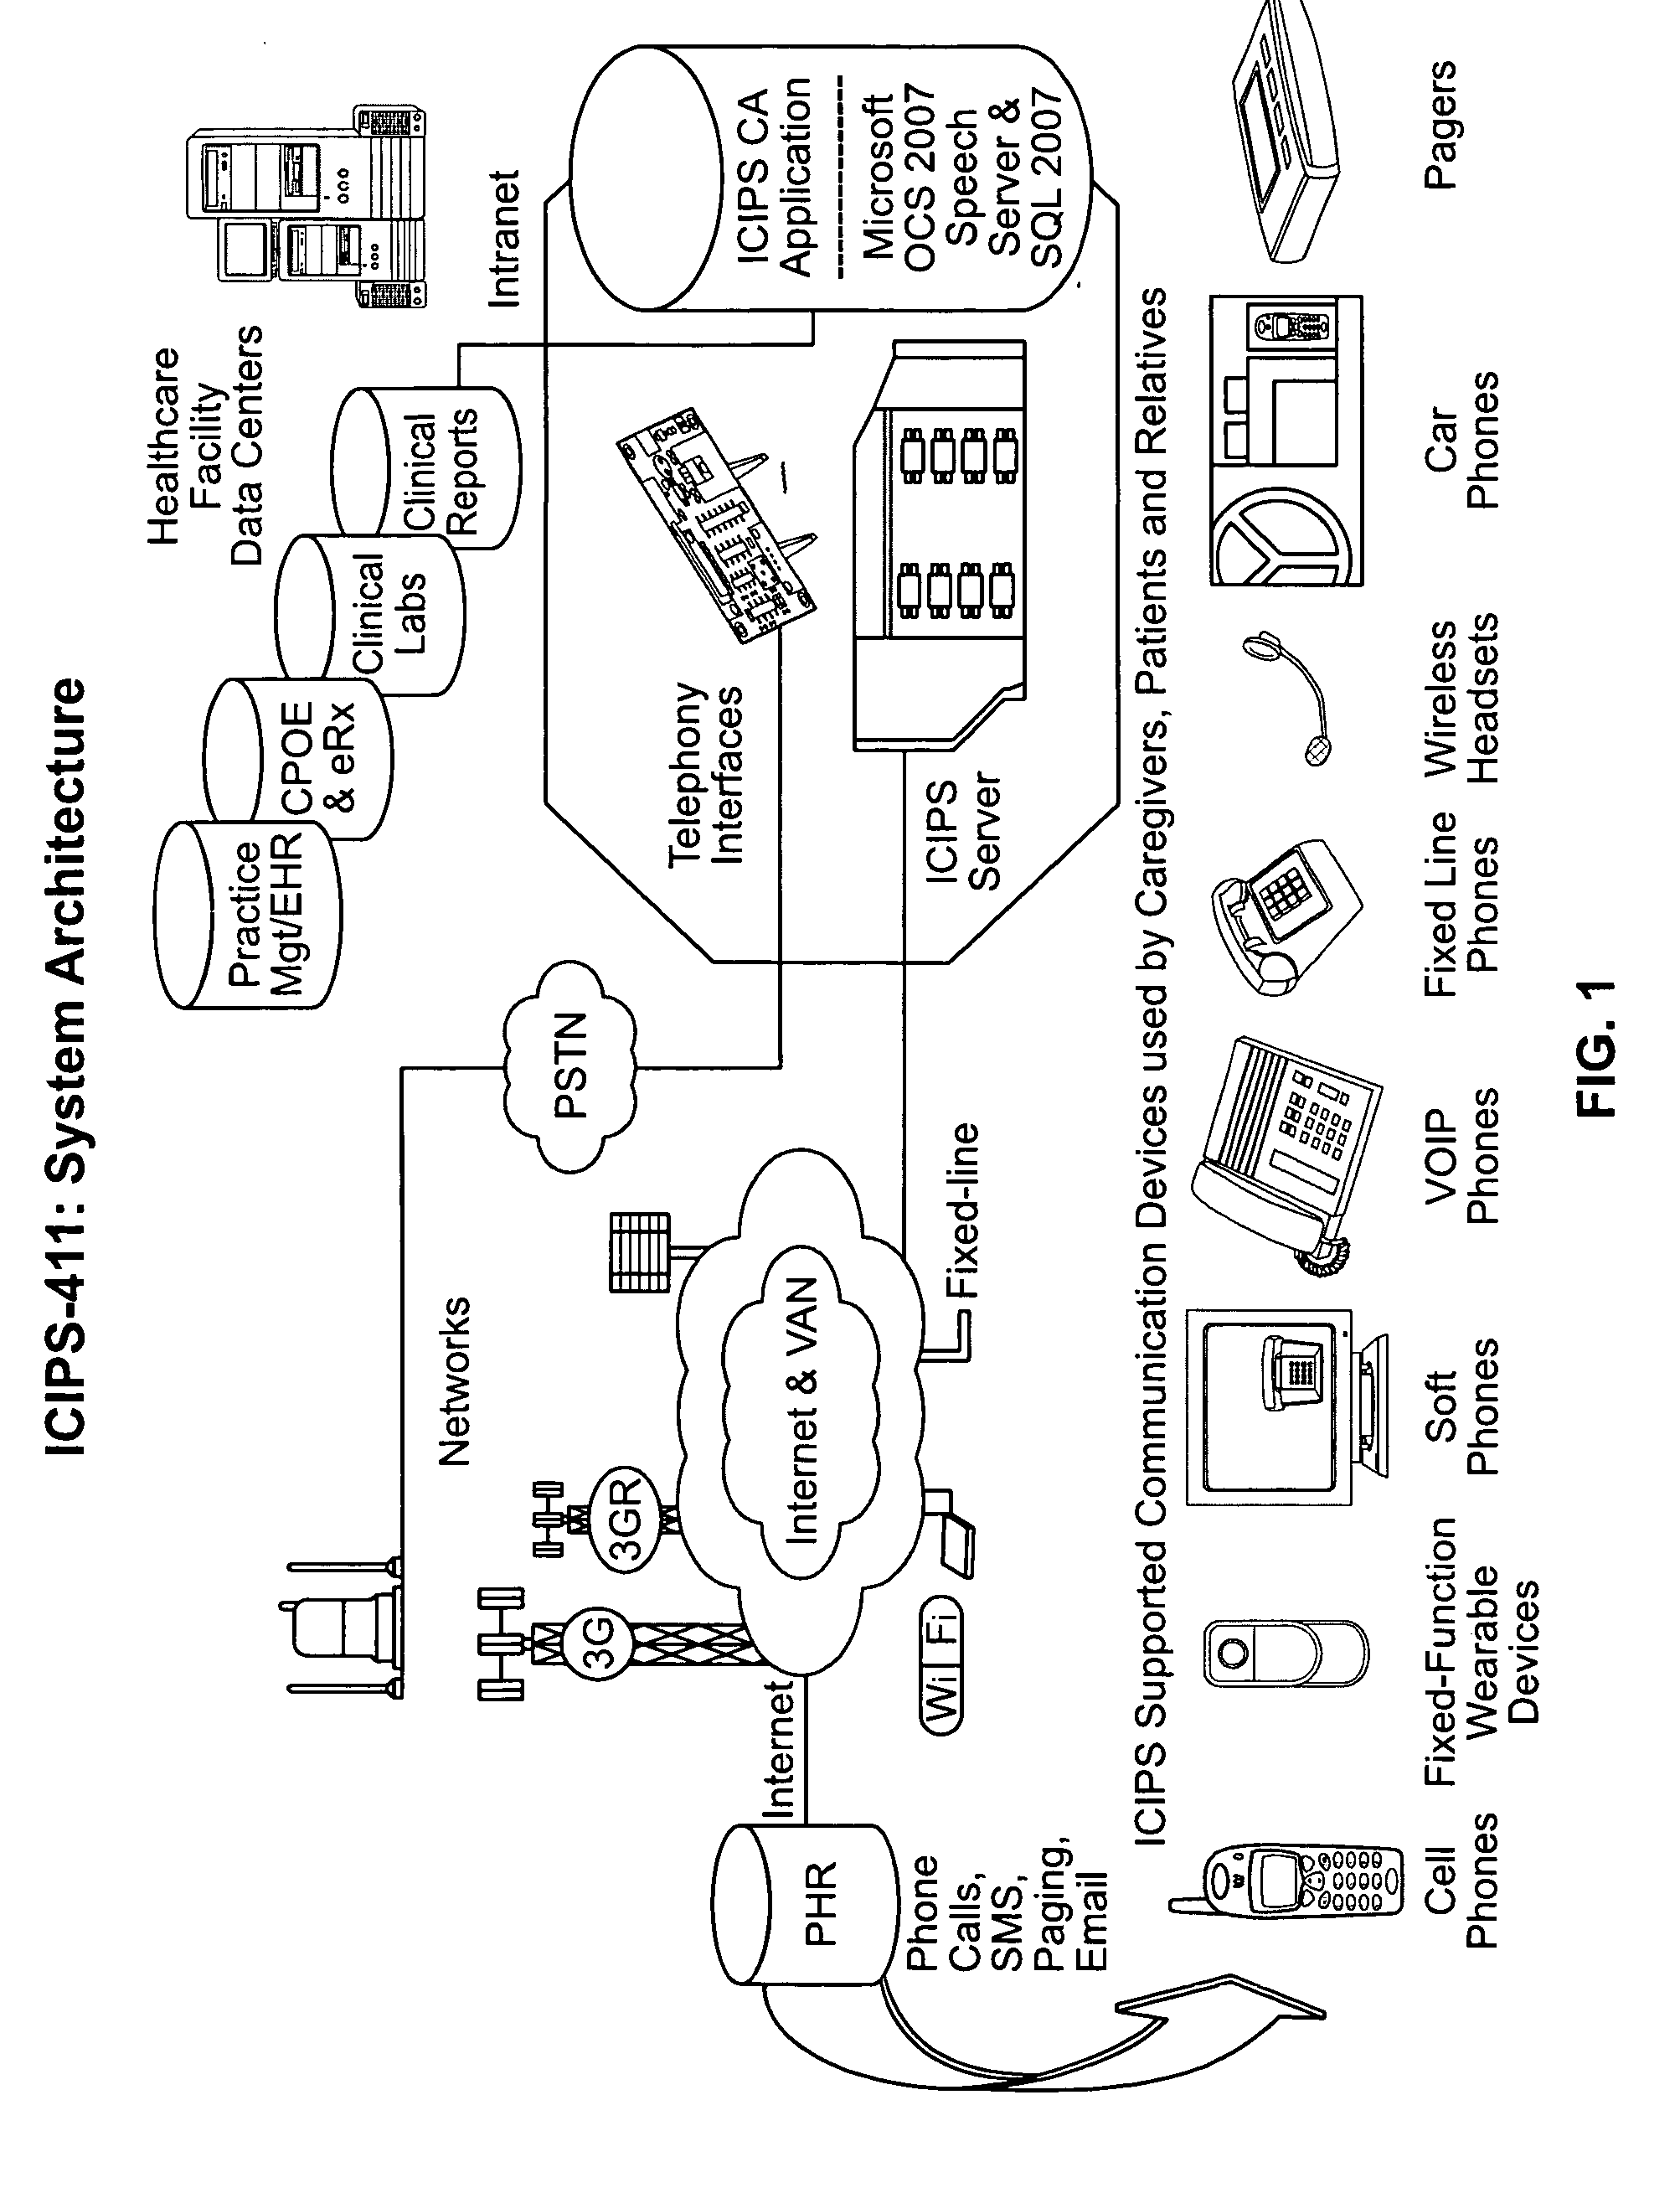 Clinical information system